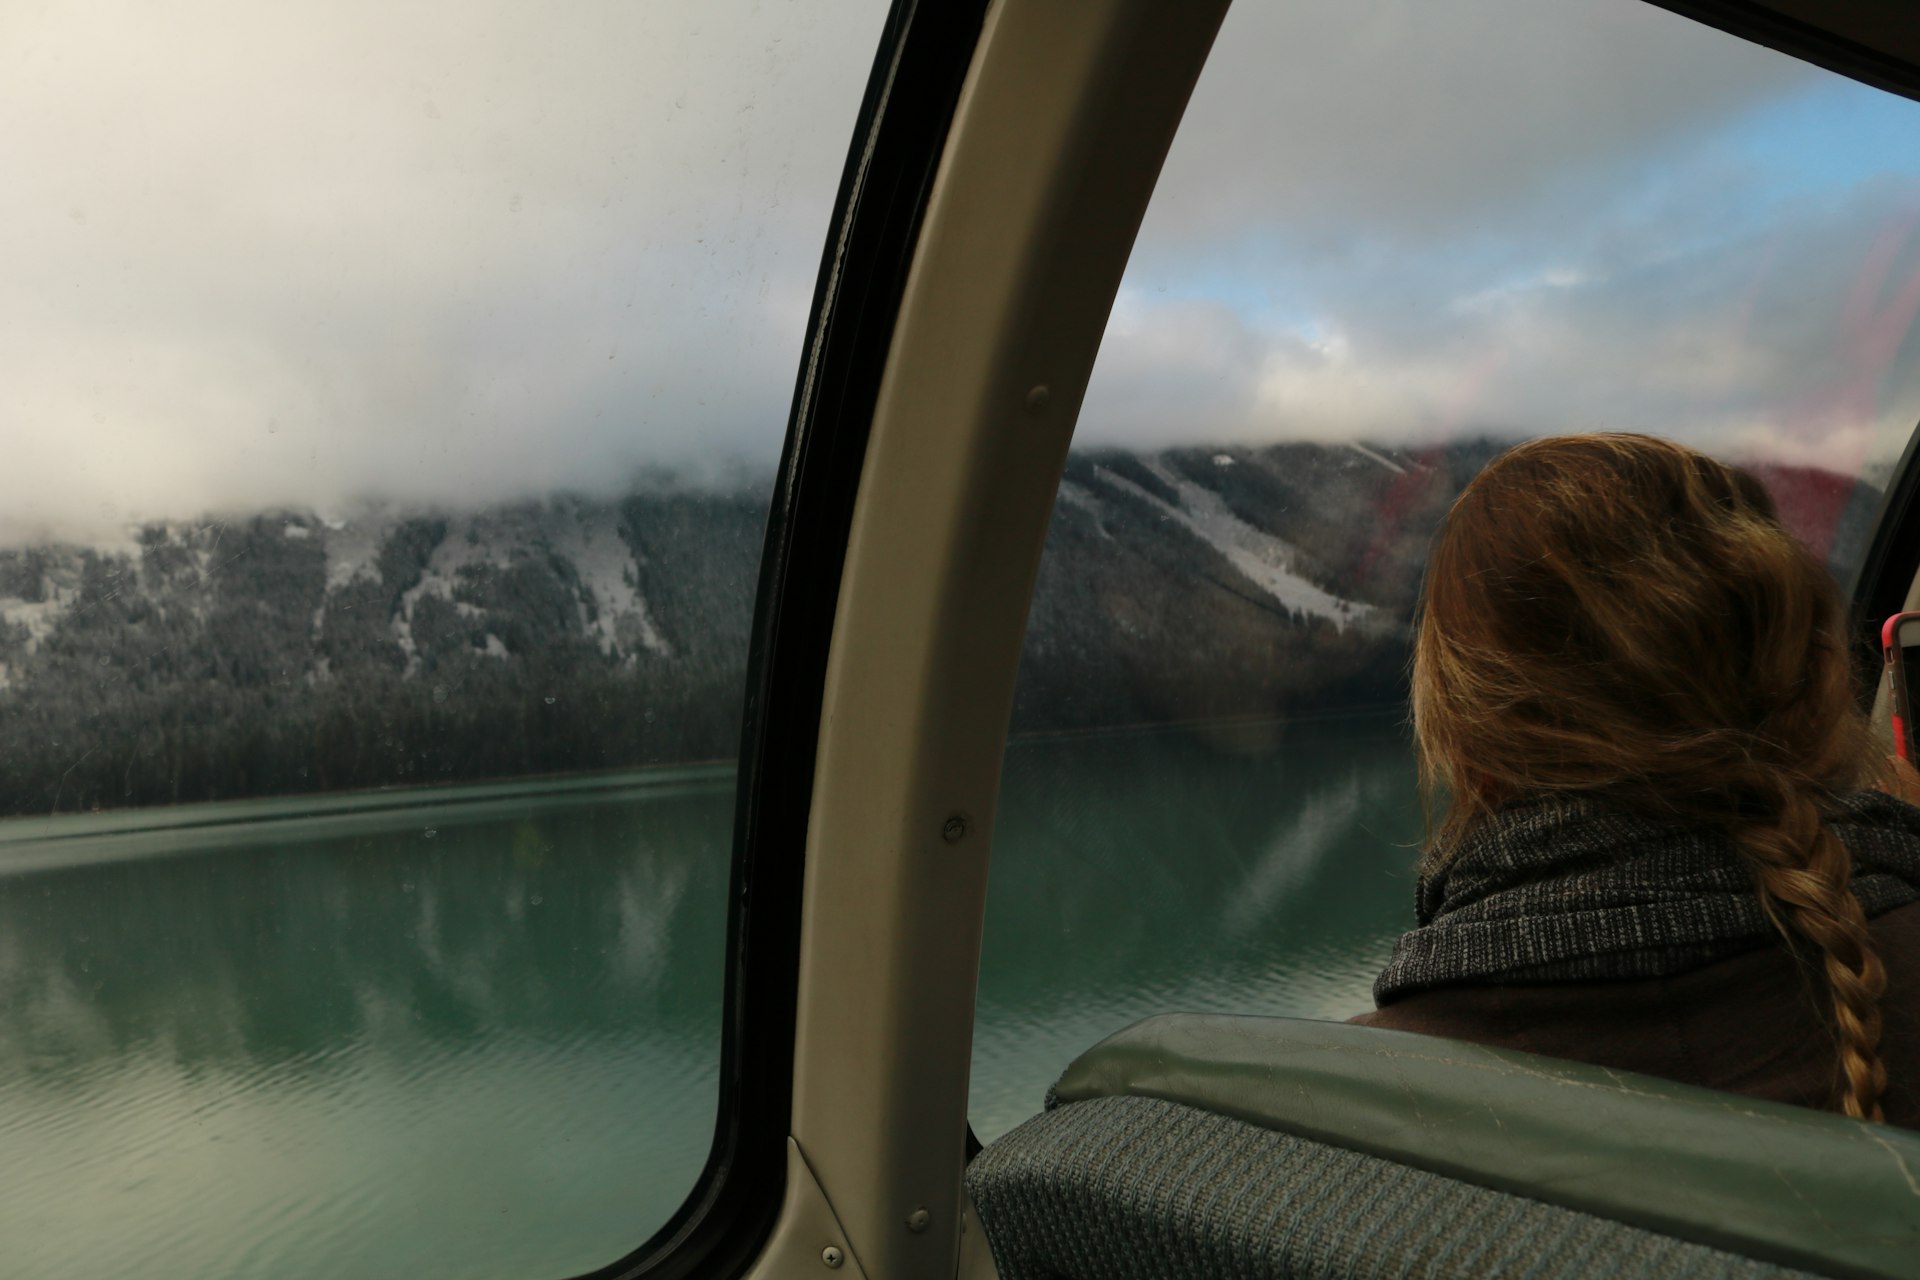 A woman looks out the window of a train car at the scenery in Jasper National Park